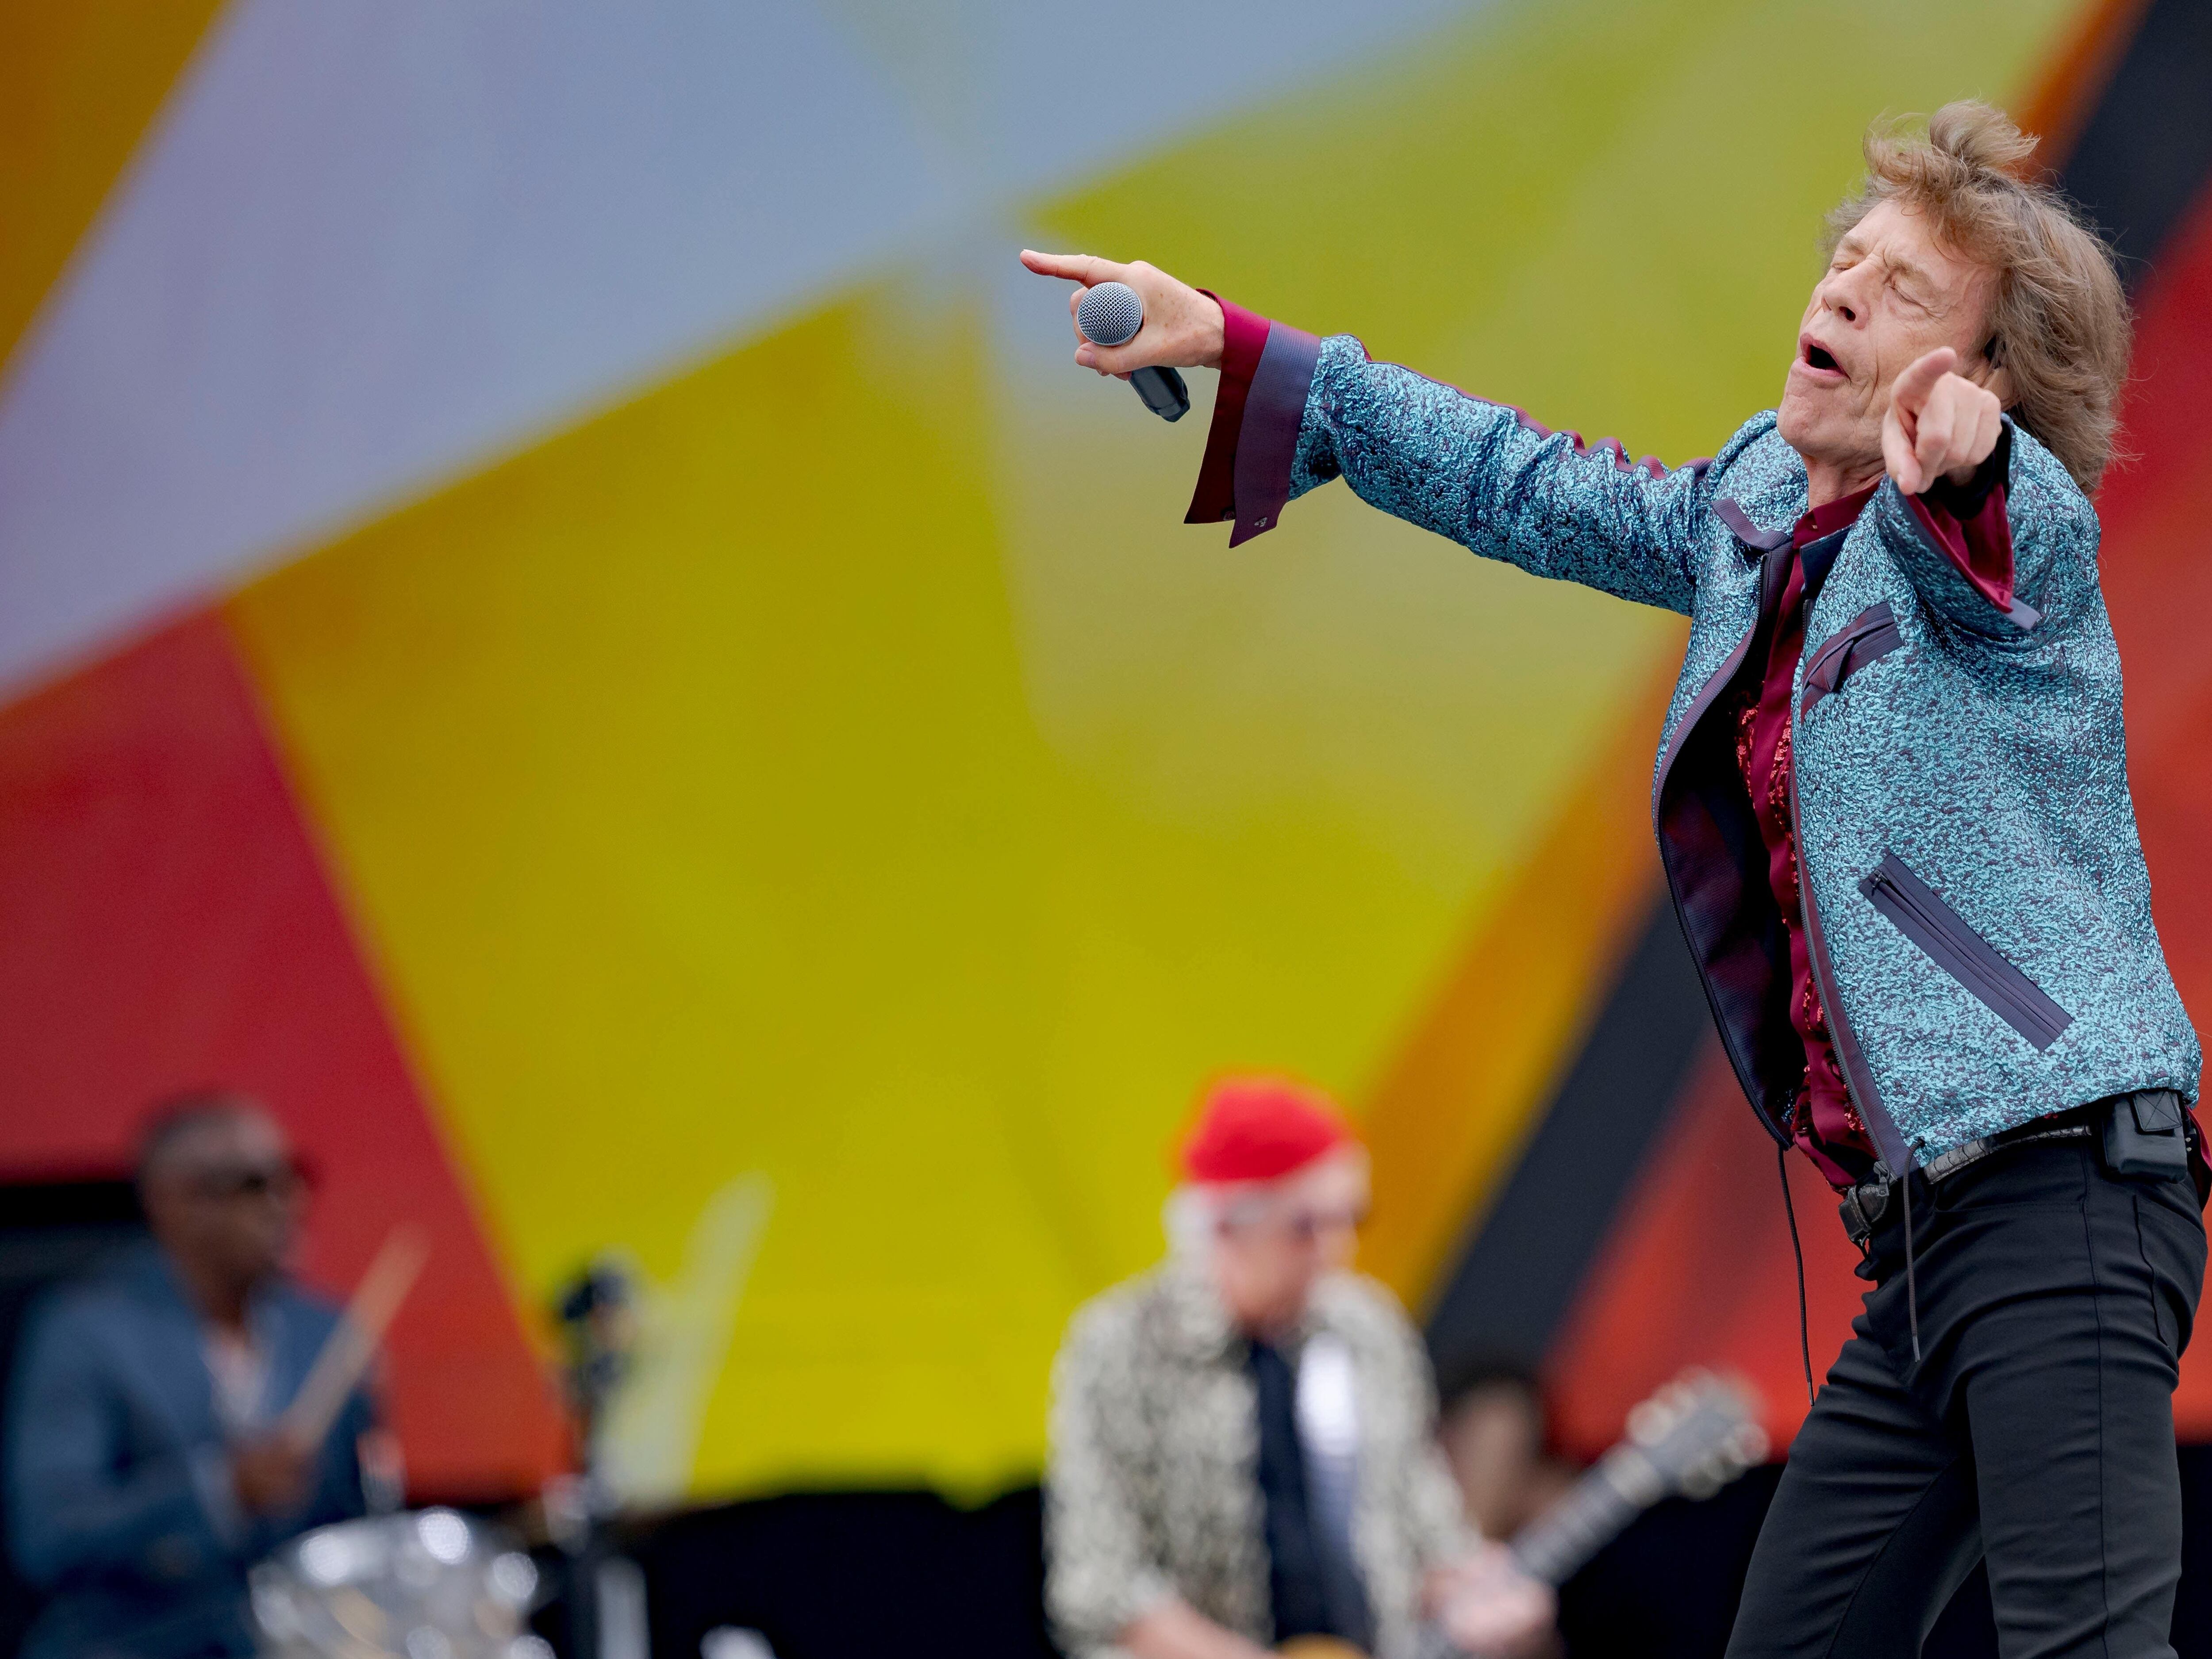 Mick Jagger gets into spat with Louisiana’s Republican governor